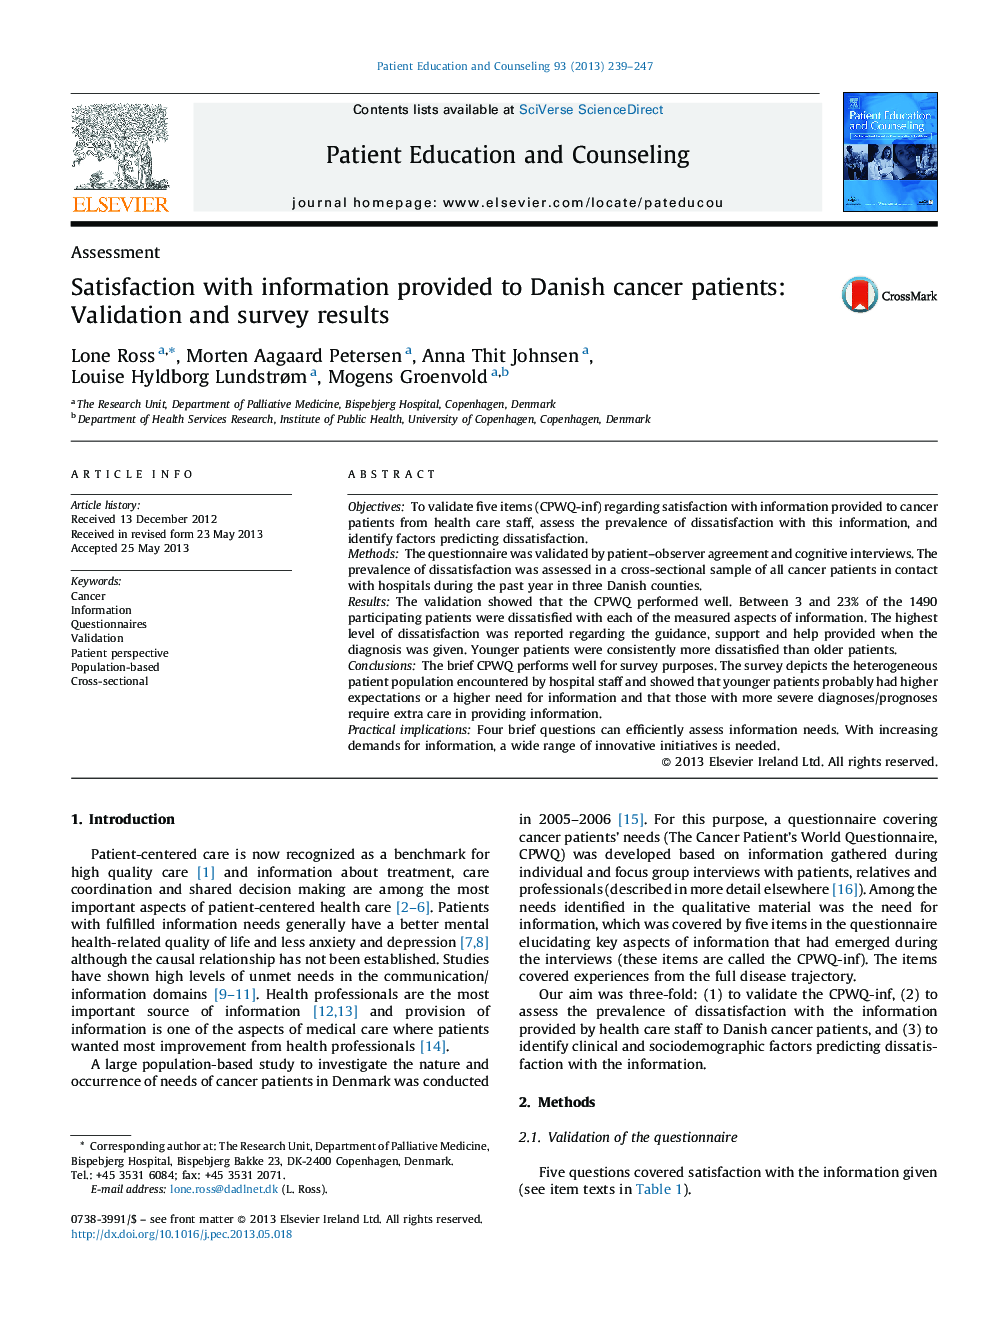 Satisfaction with information provided to Danish cancer patients: Validation and survey results